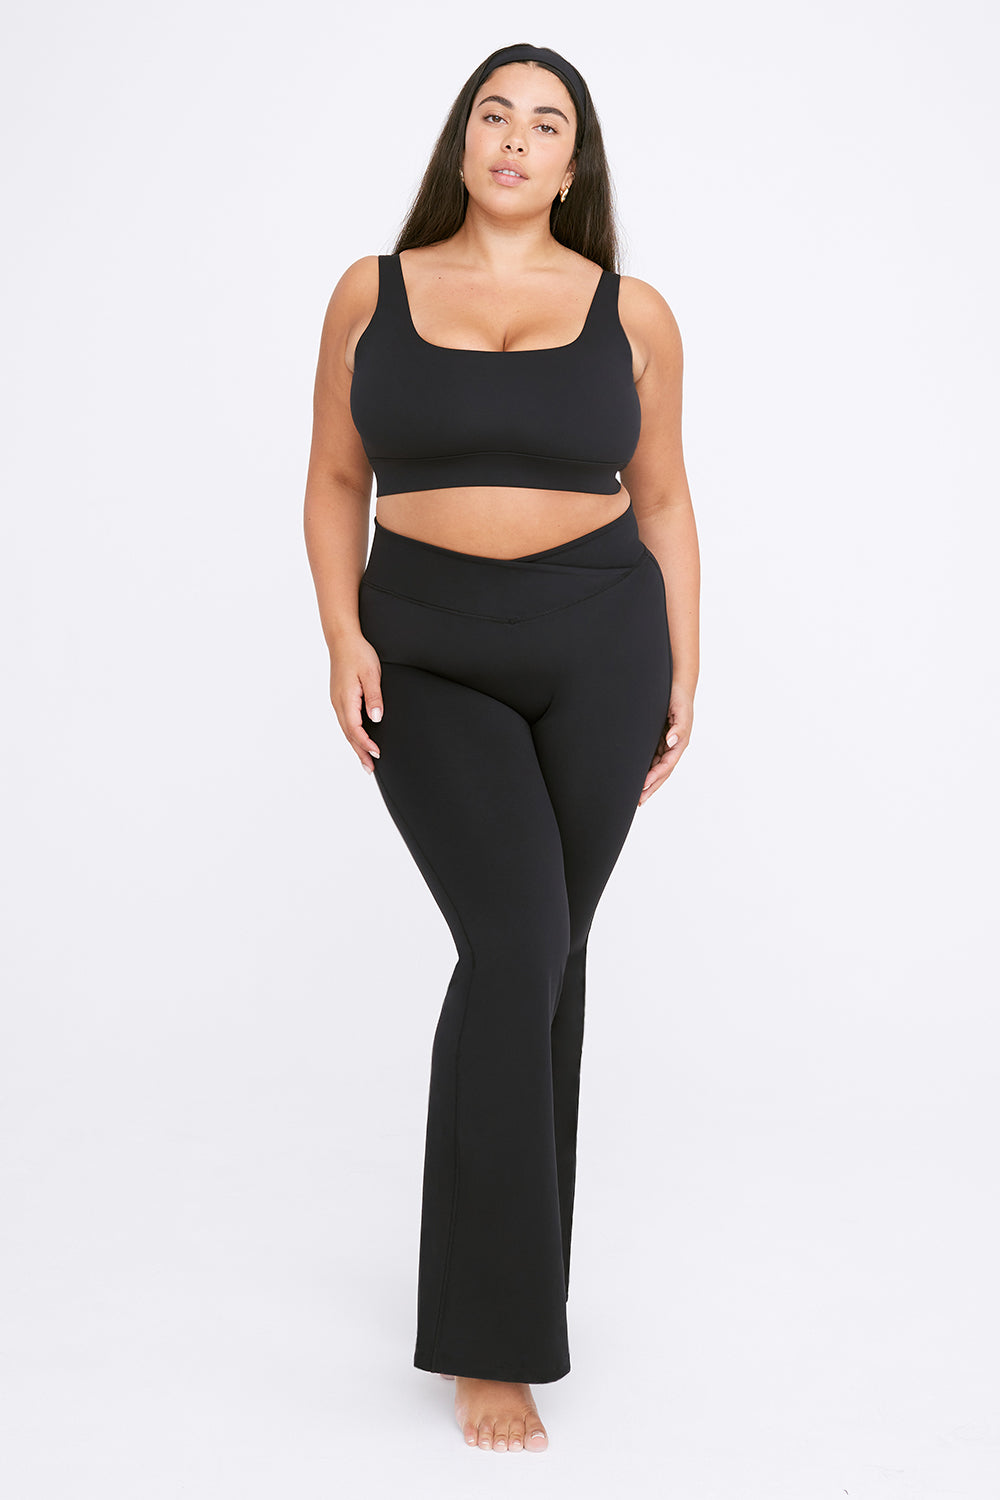 Petite Flare Yoga Pants for Women with Pockets, Plus Size High